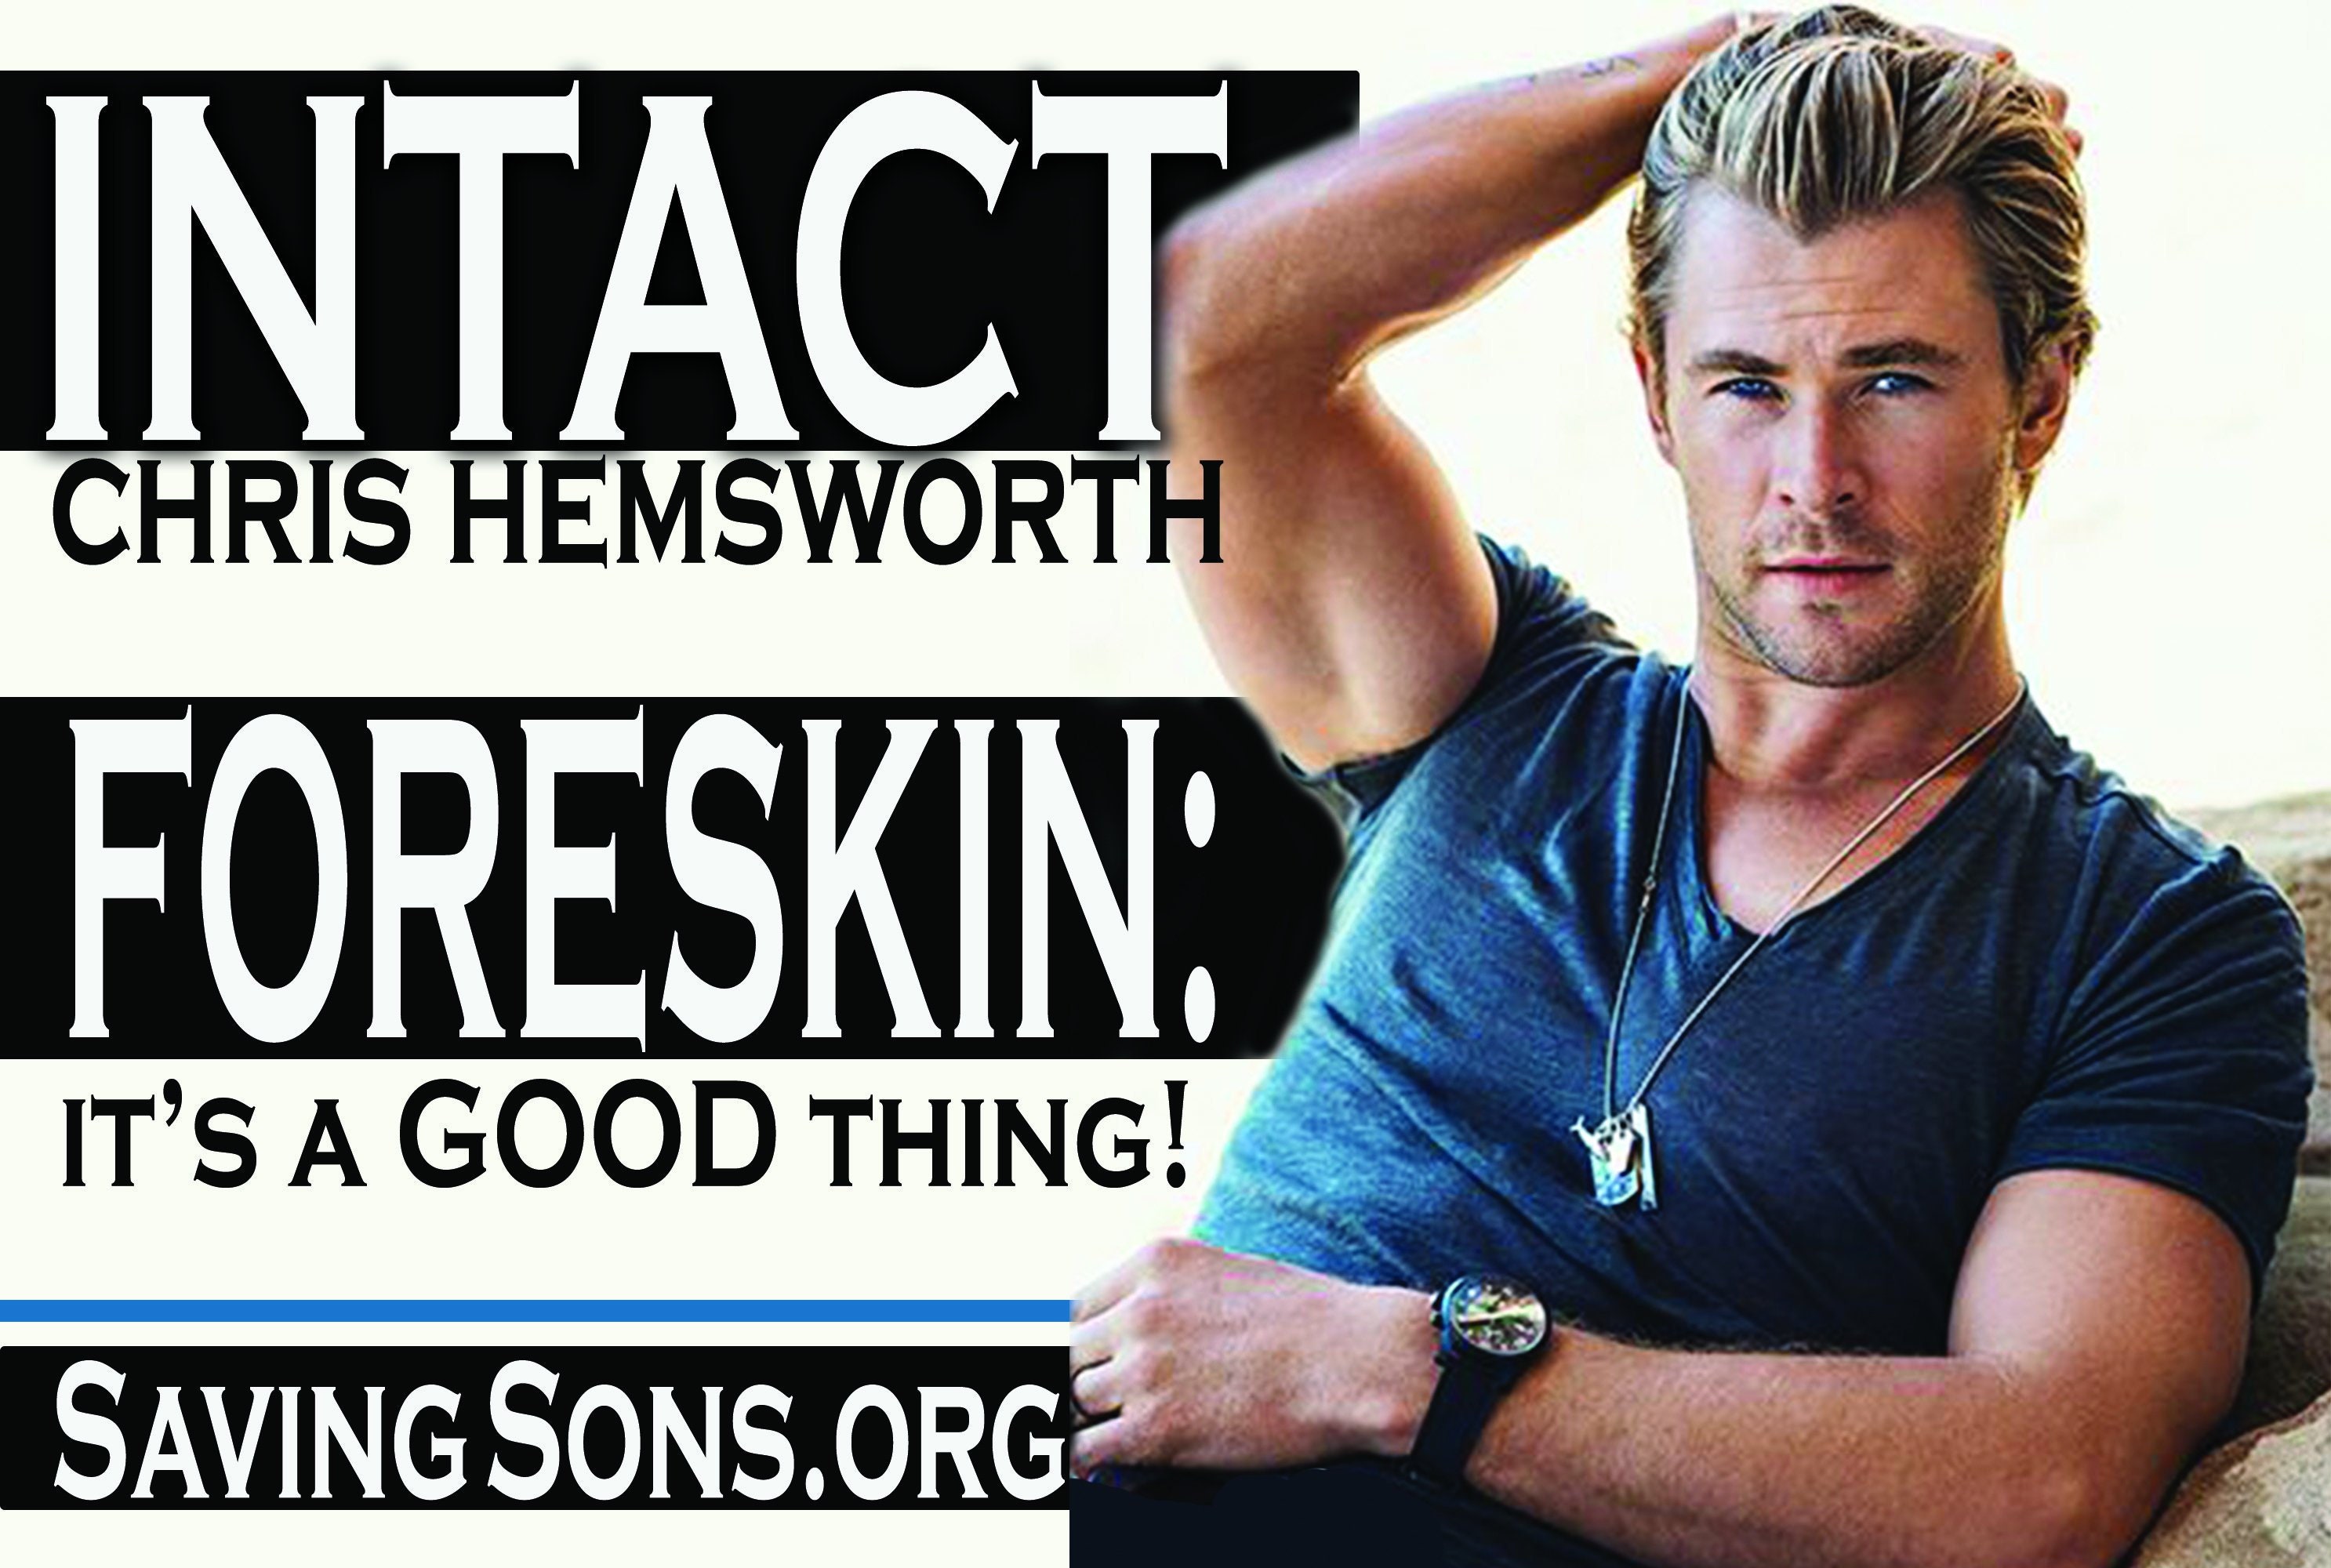 Intact Chris Hemsworth: Foreskin It's a GOOD Thing - Etsy Norway